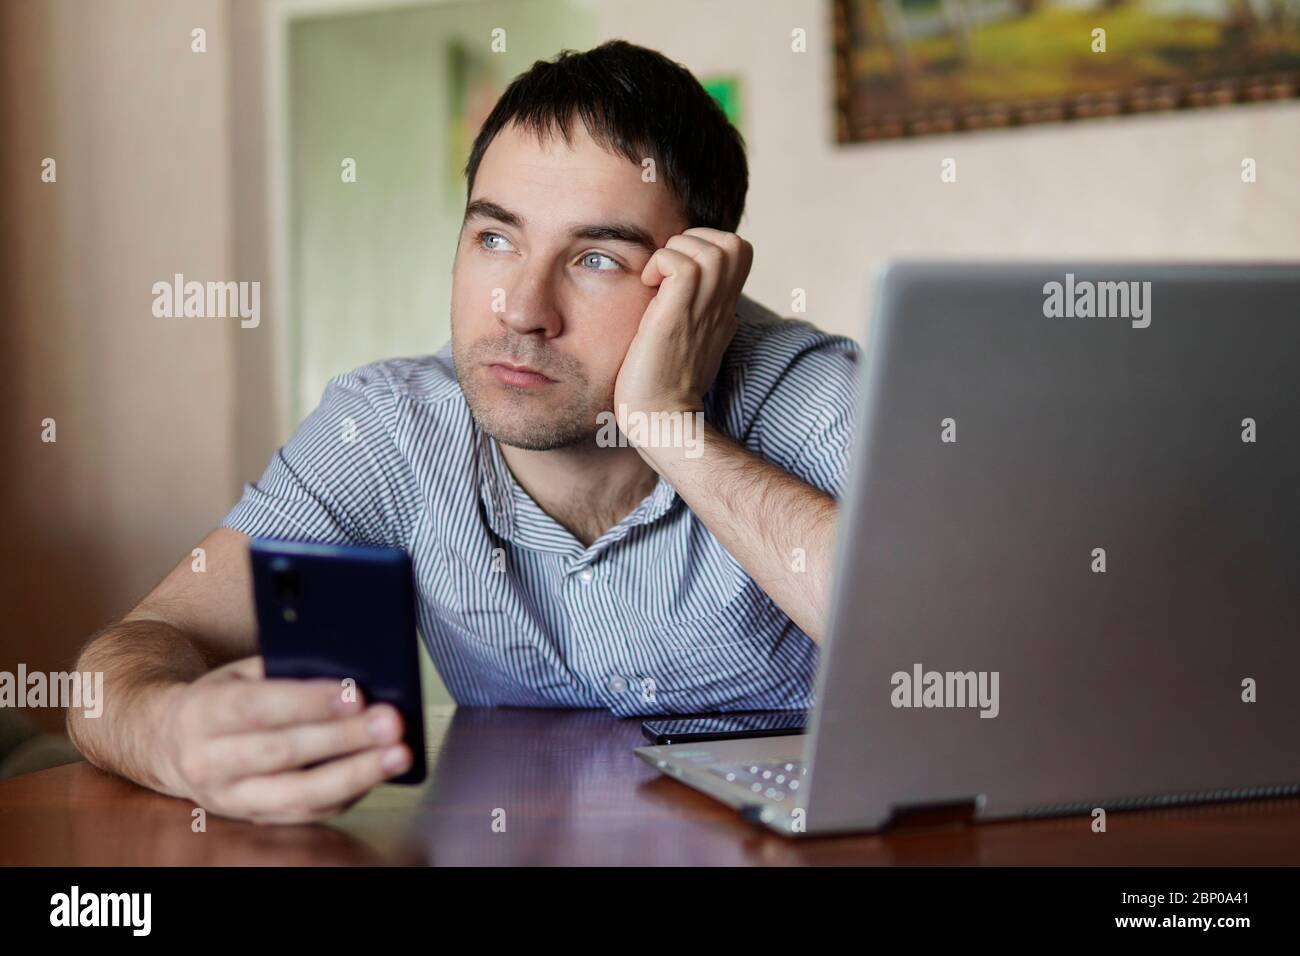 Sad cute young man holding a smartphone in his hand a man working on a laptop remotely. Fatigue from quarantine, self-isolation. Stock Photo